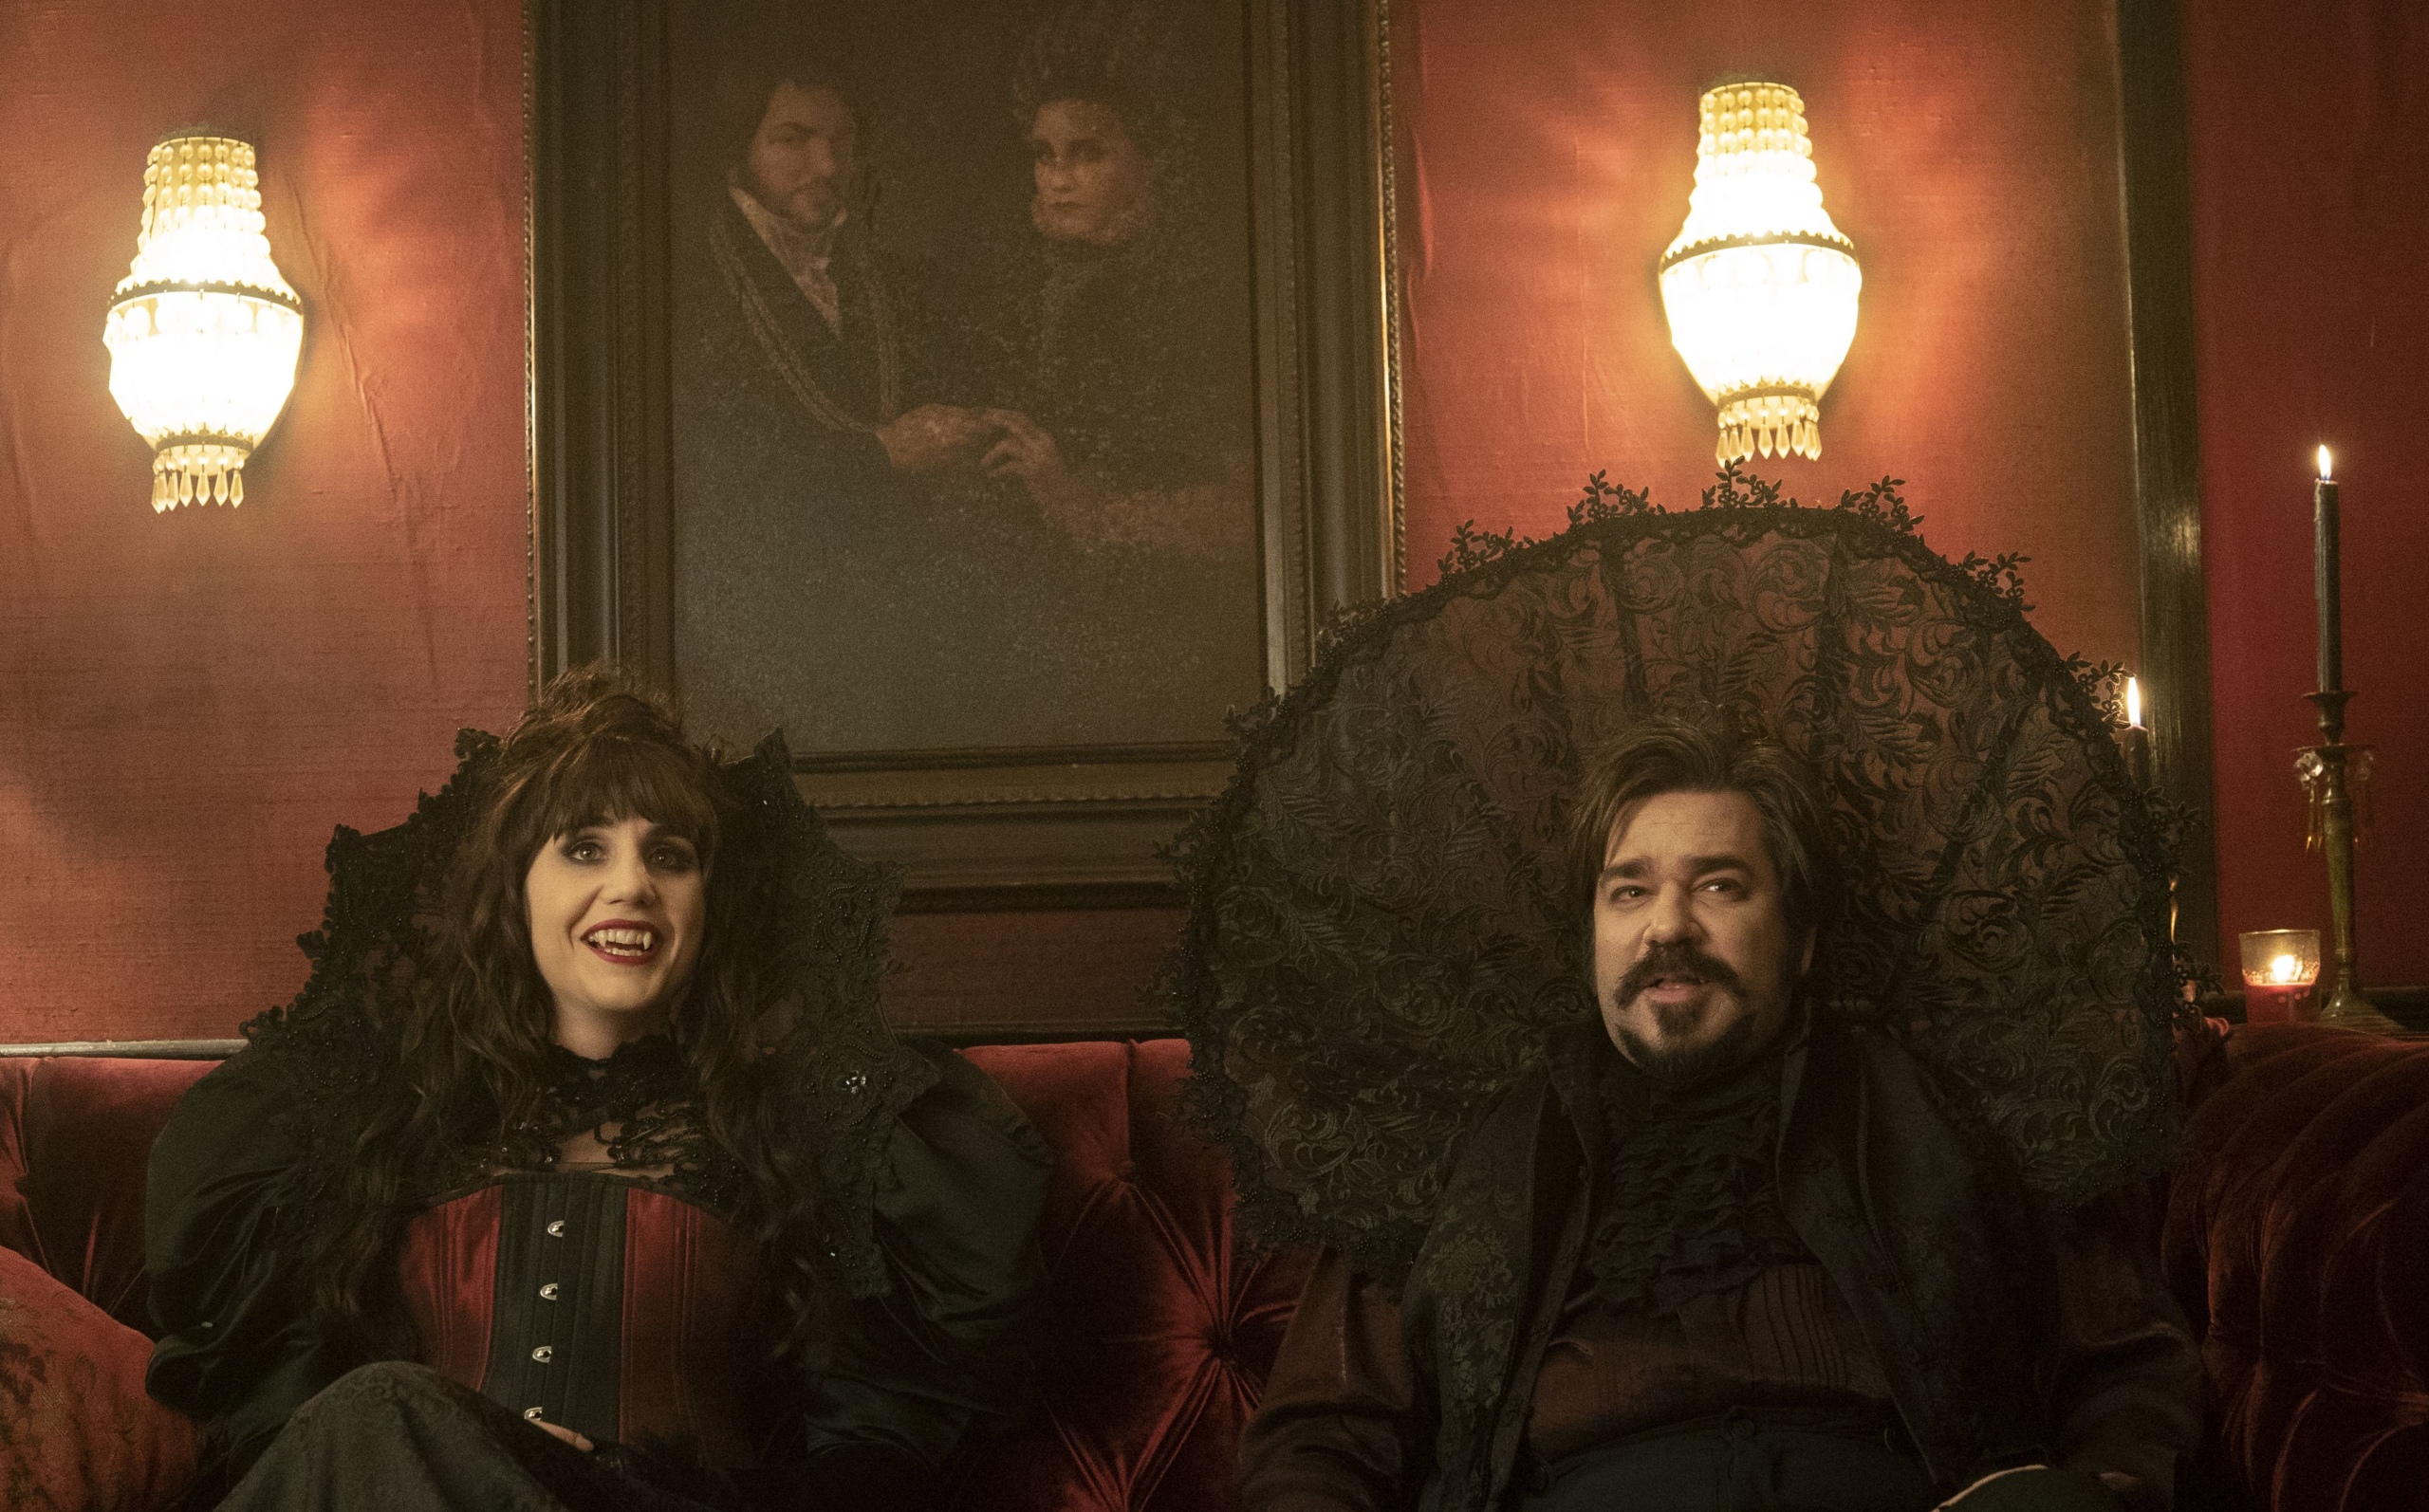 Nadja and Laszlo dressed in gothic outfits with high collars. They sit on a sofa under a portrait of themselves. 